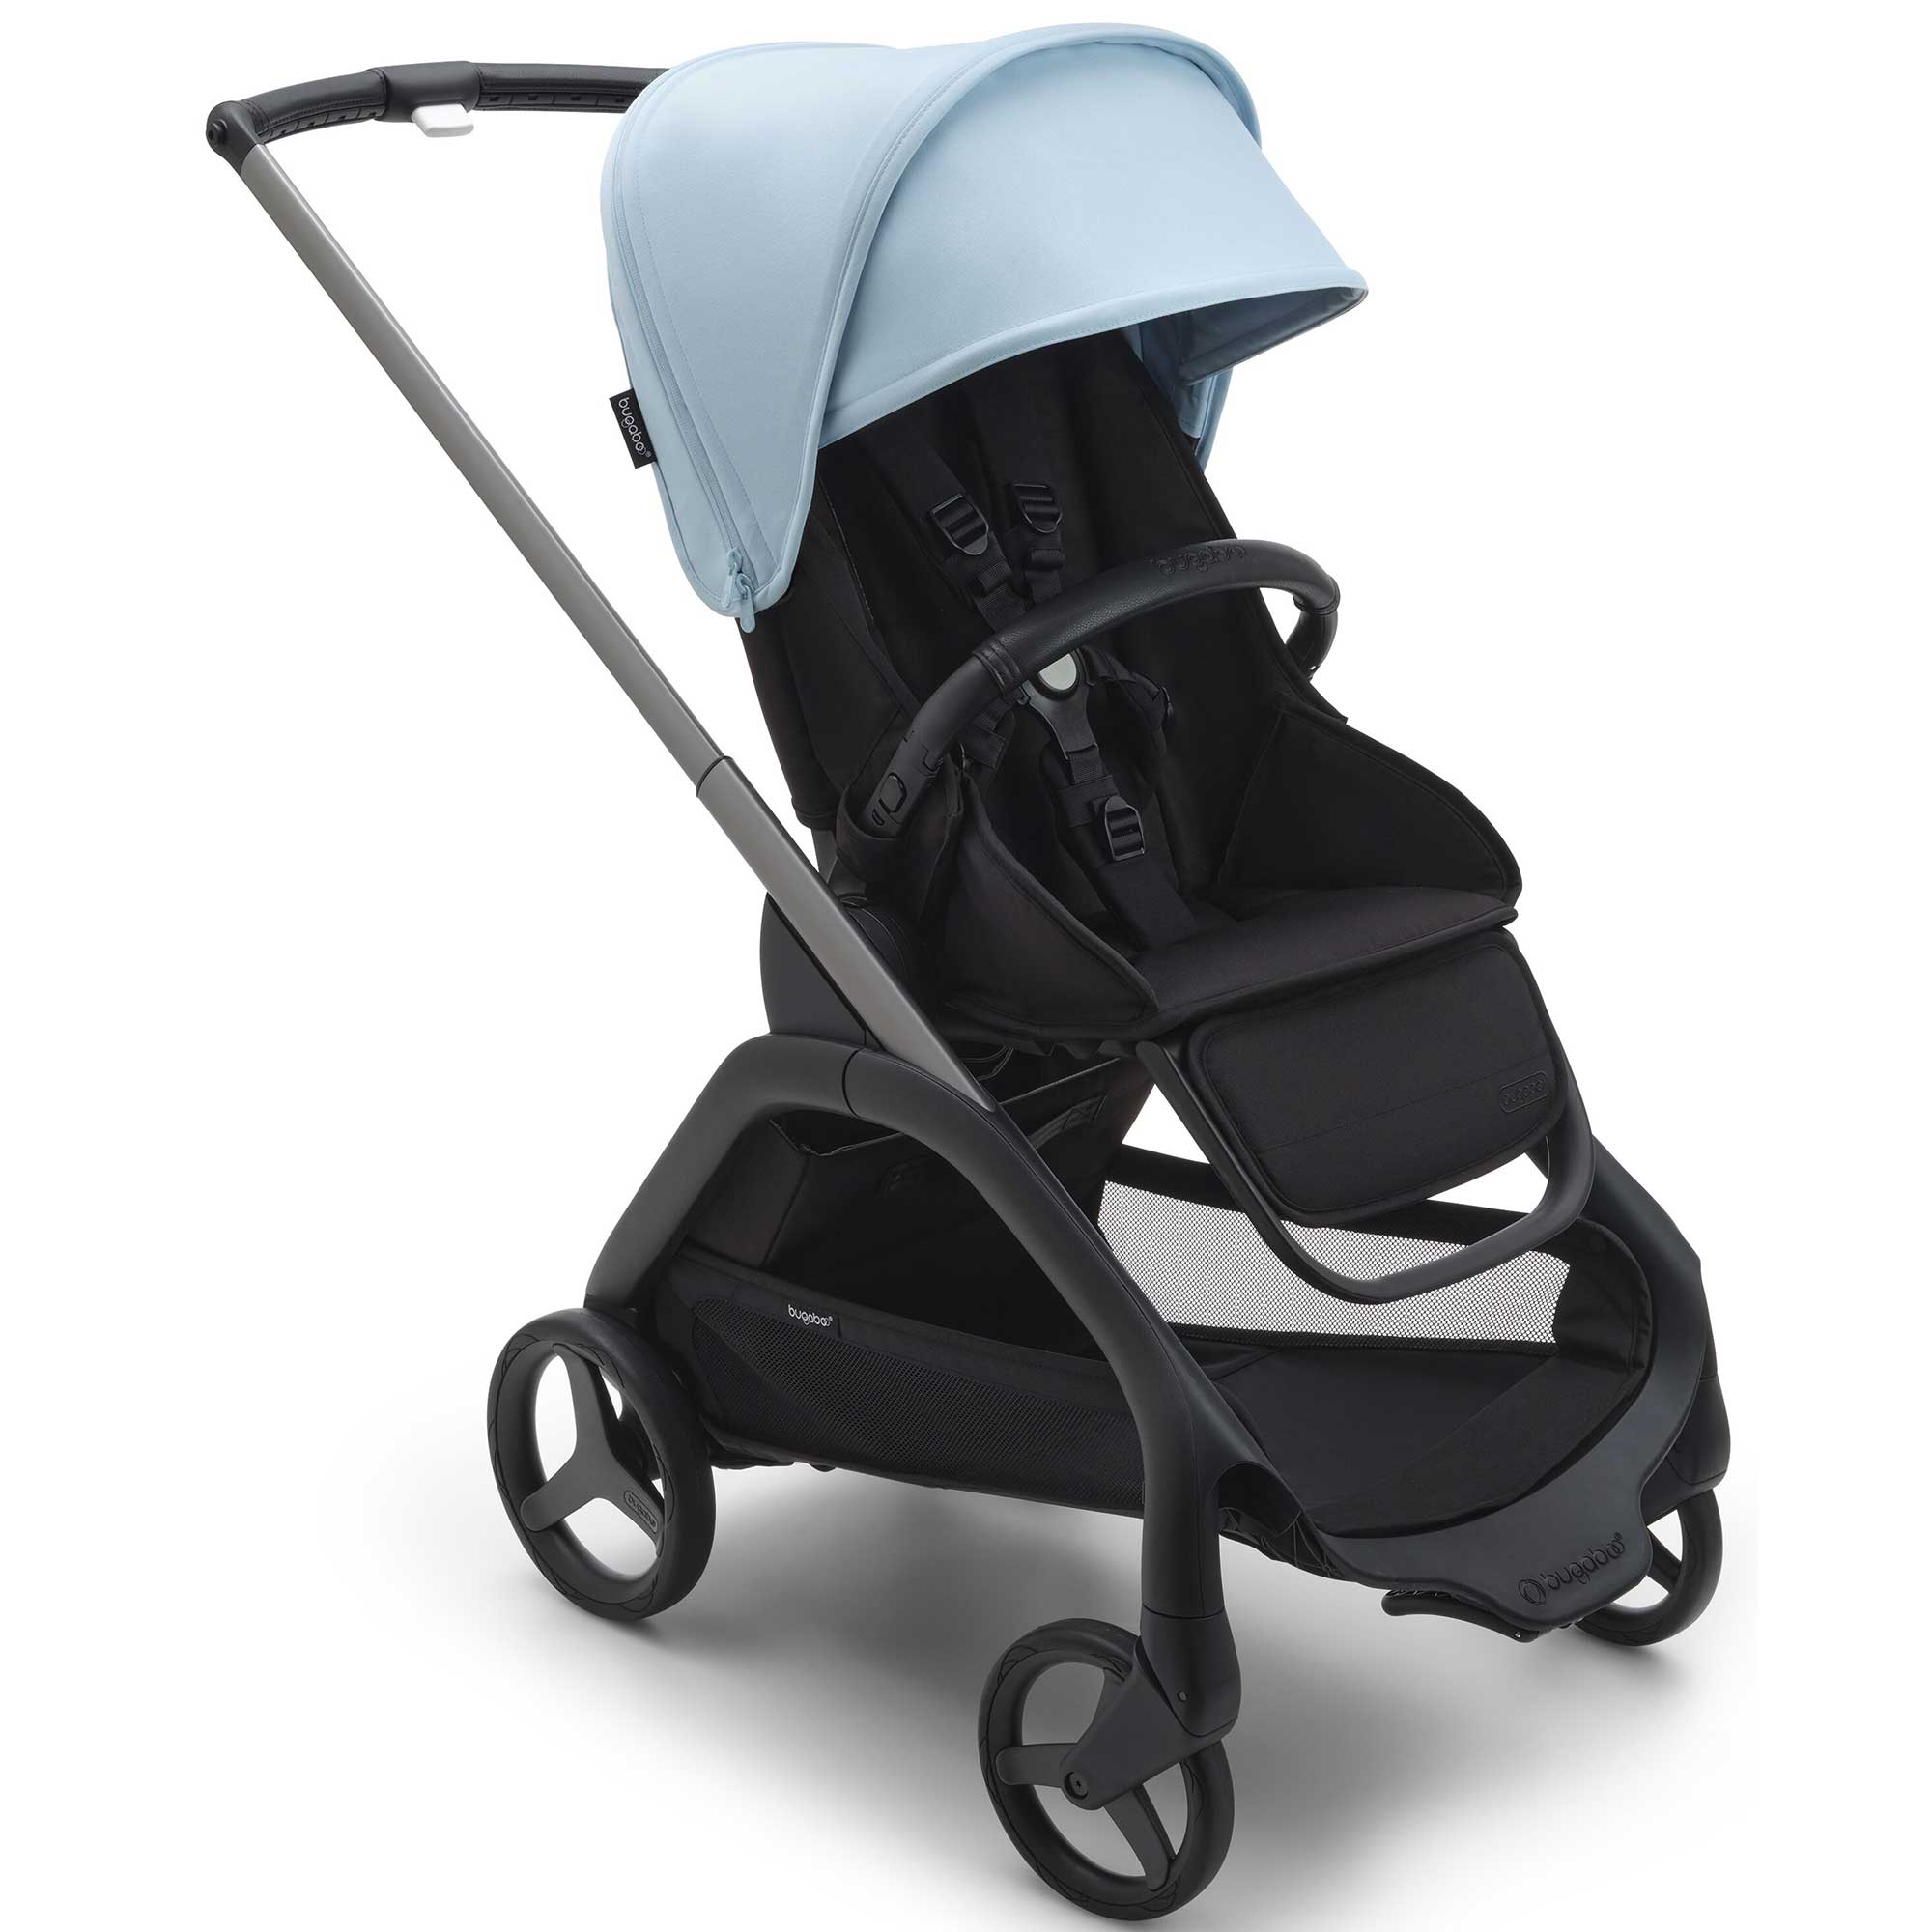 Bugaboo Travel Systems Bugaboo Dragonfly Pebble 360 Pro Travel System in Graphite/Midnight Black/Skyline Blue 13816-GRA-MID-SKY